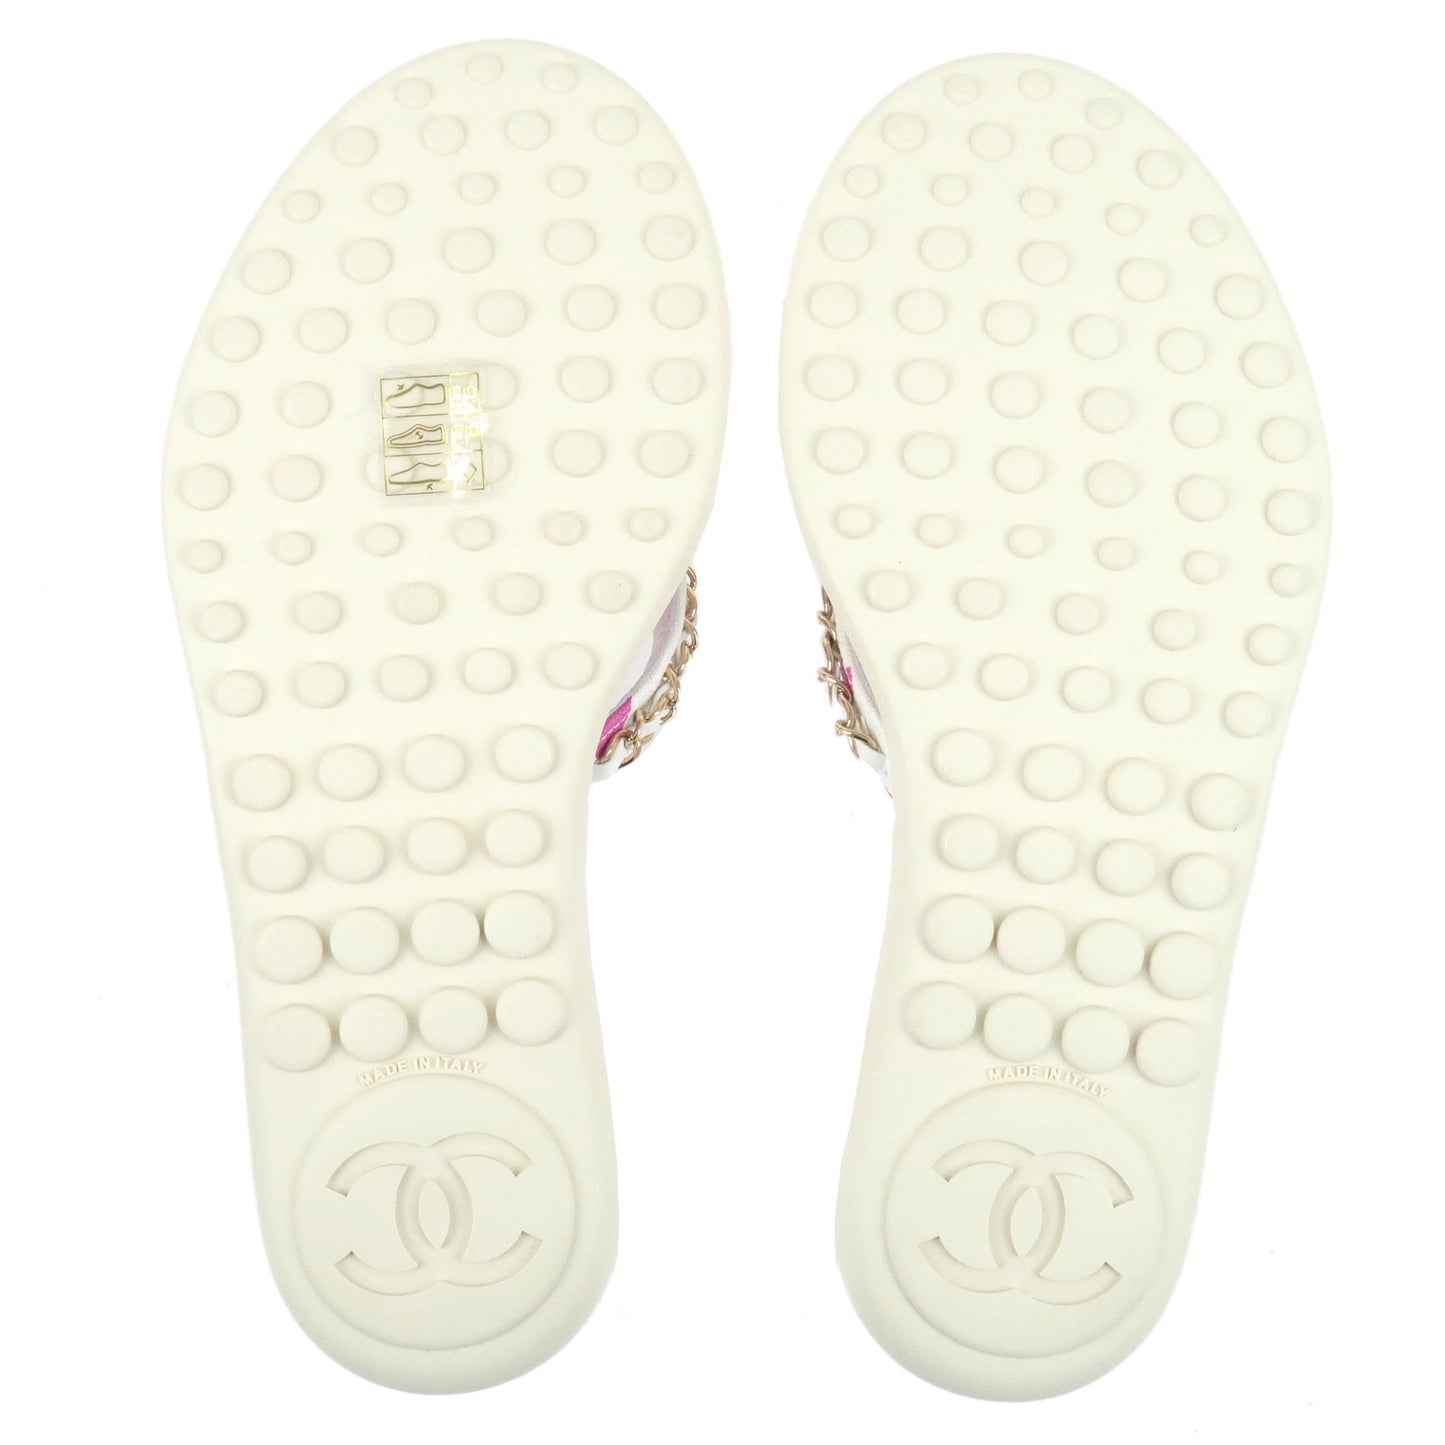 CHANEL Coco Beach Flip Flop Canvas Leather Pink US5.5 EUR36 G35965 Used